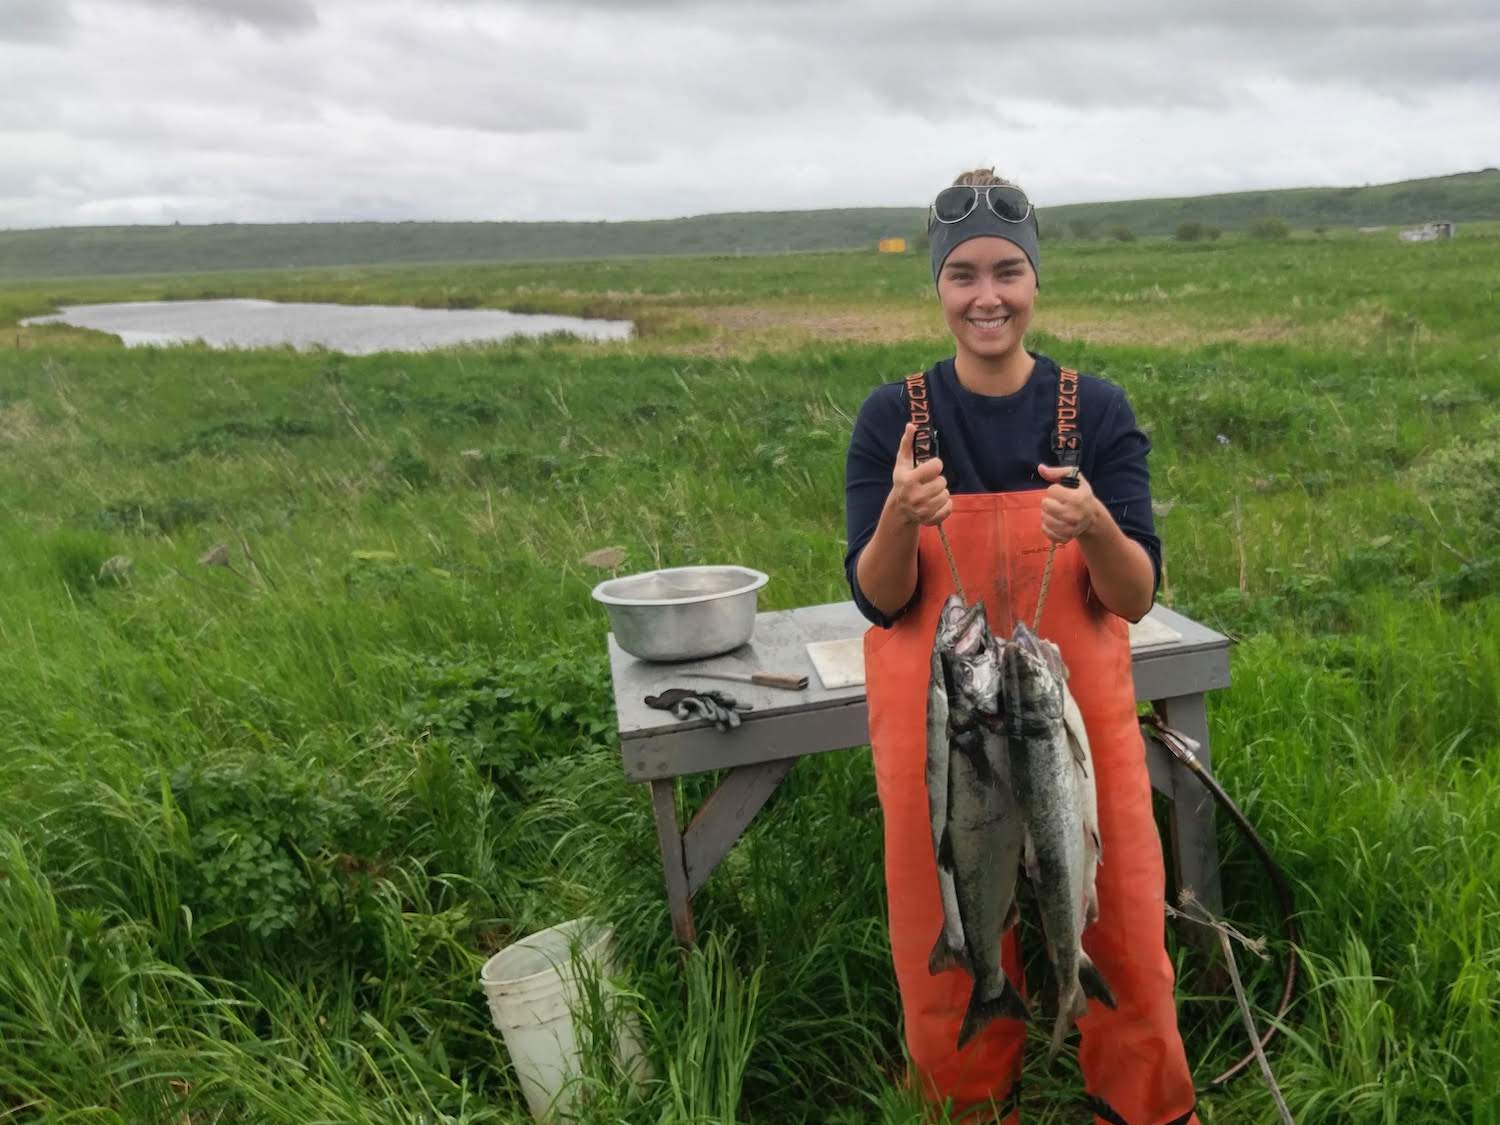 In Bristol Bay, Alaska, locals fear Covid-19 will arrive along with 12,000 temporary salmon workers